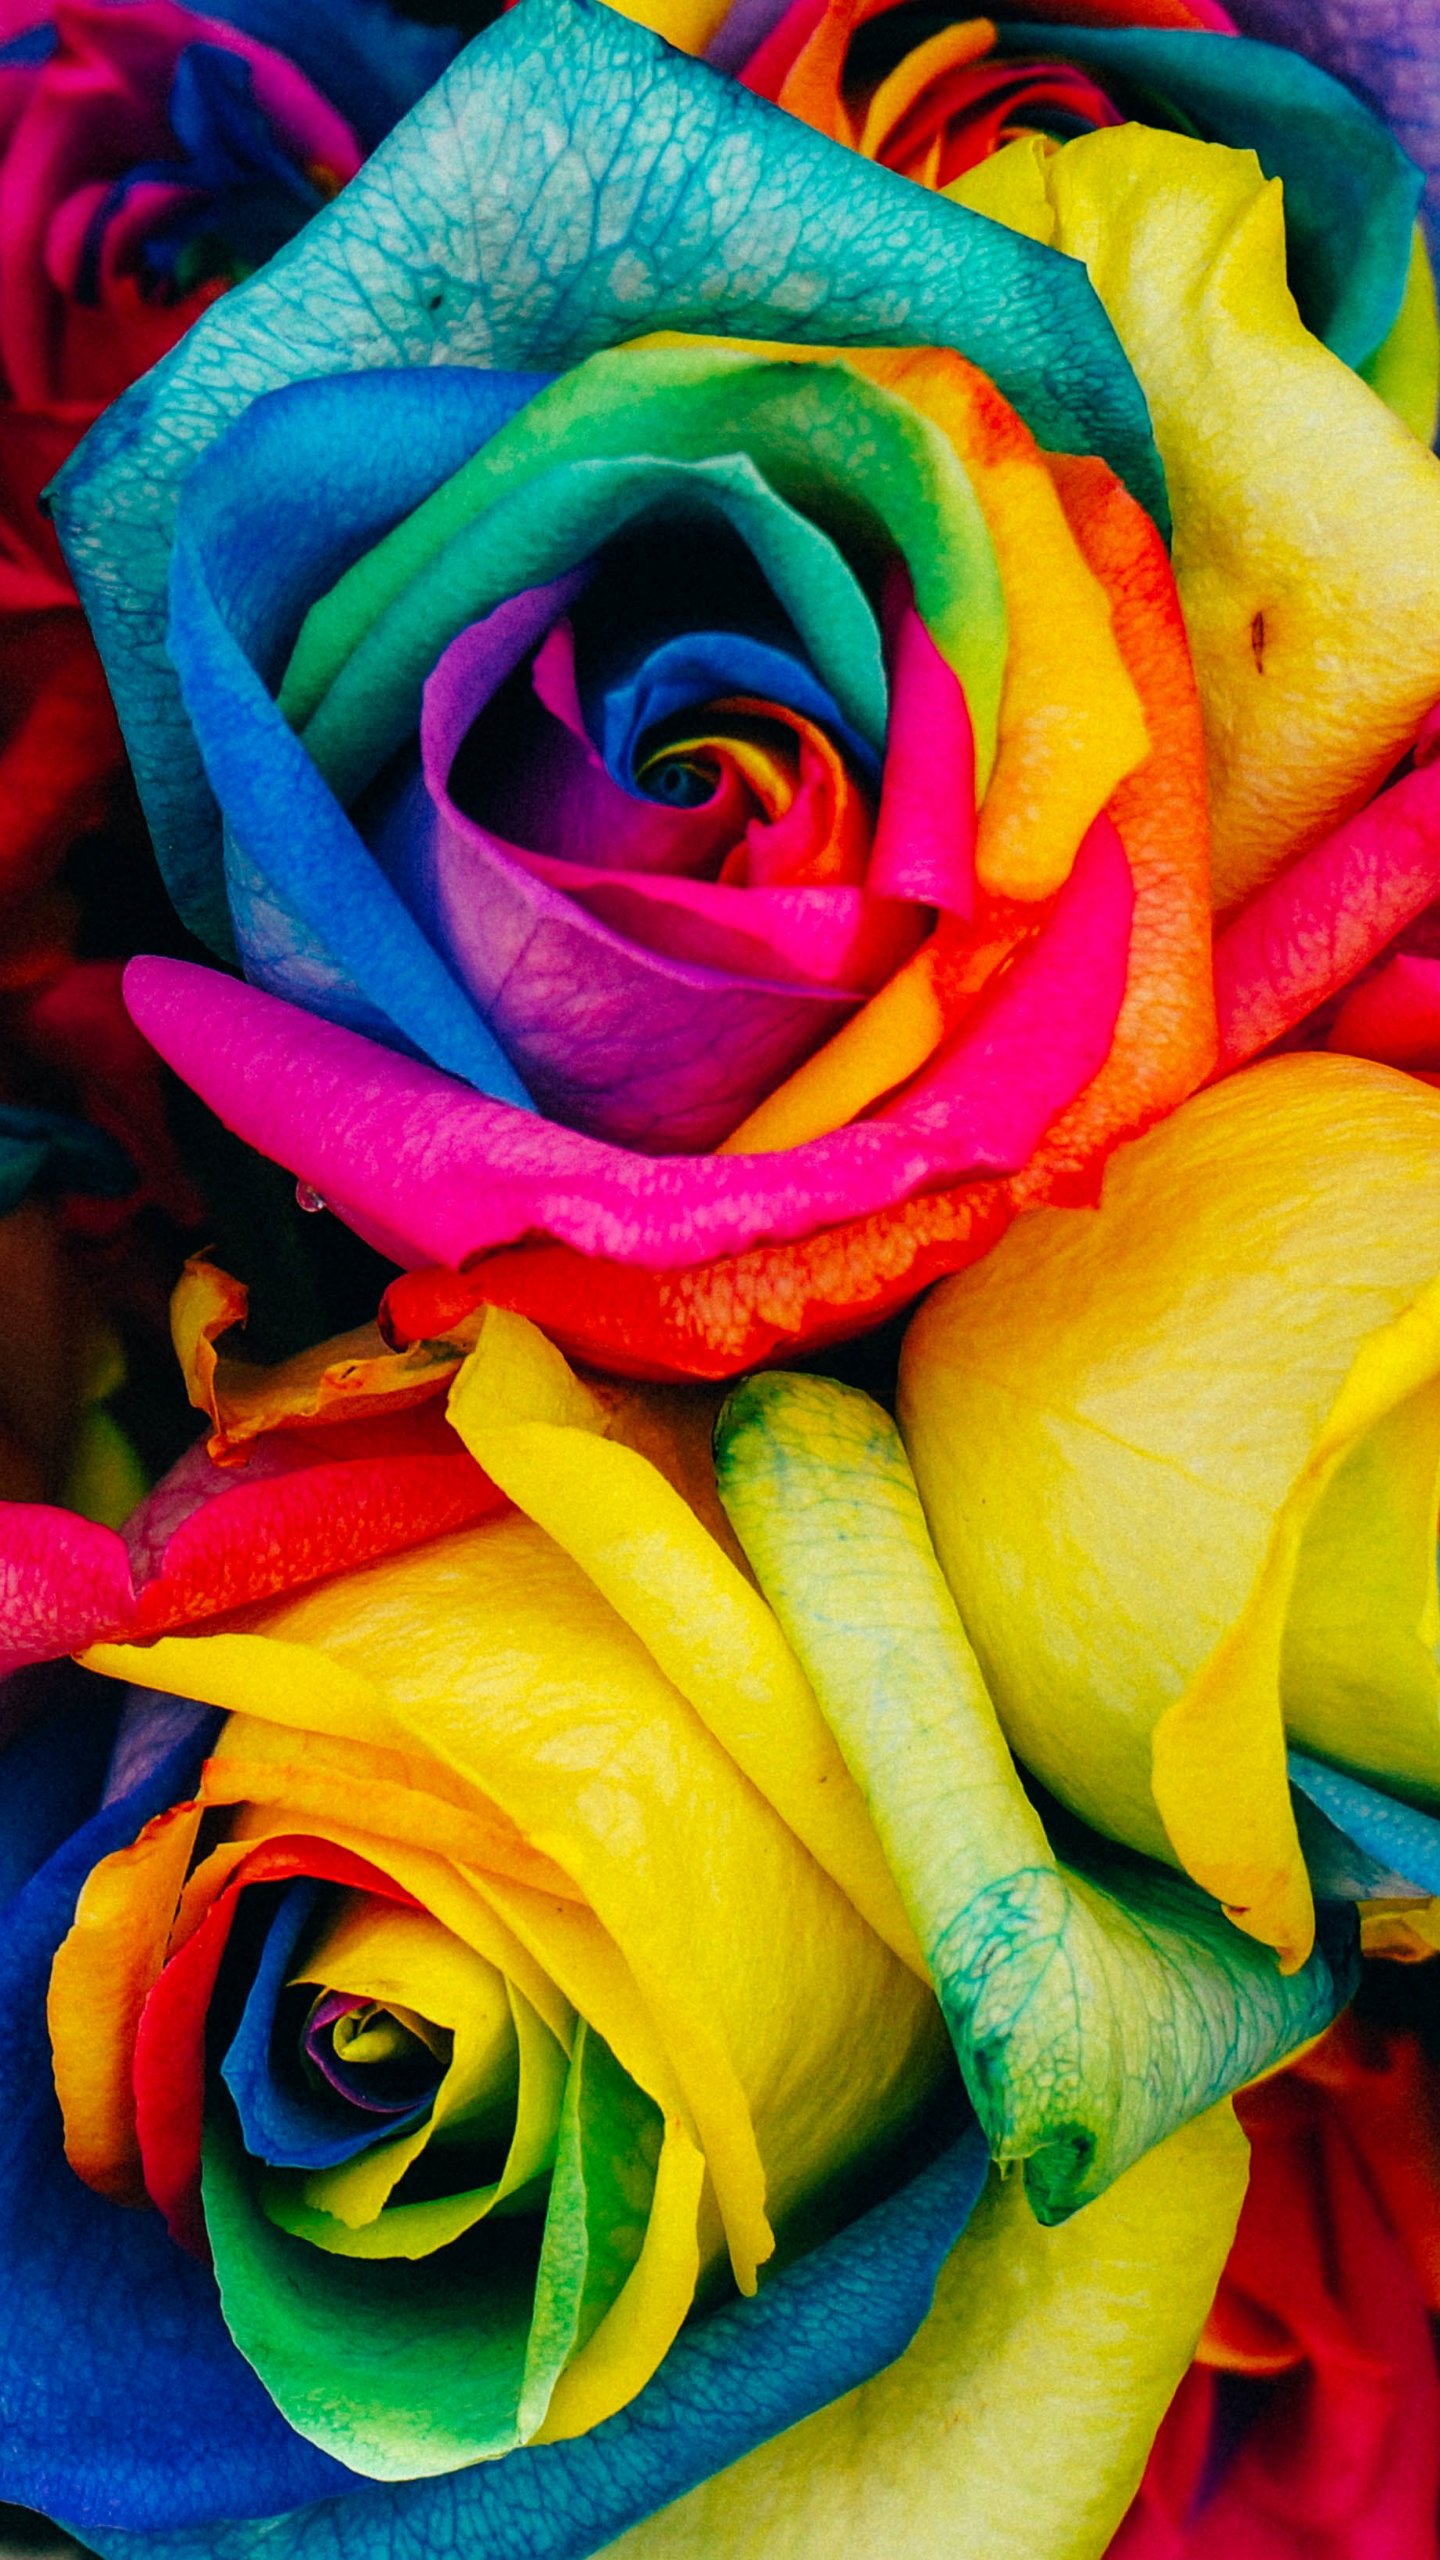 Rainbow Roses Wallpaper - iPhone, Android & Desktop Backgrounds